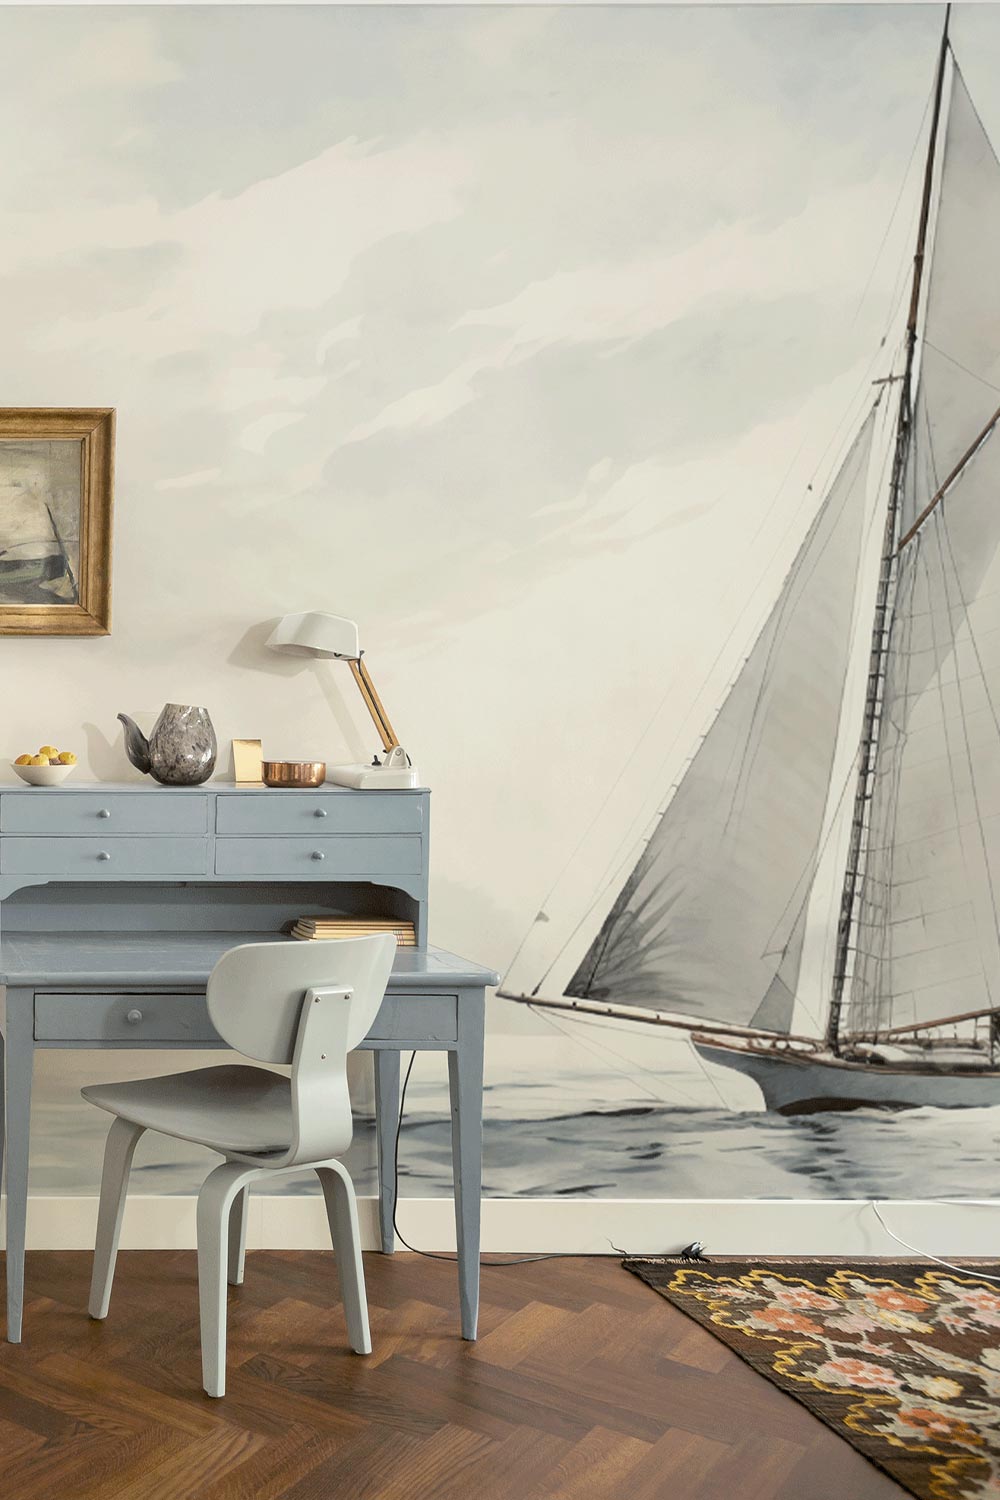 Sail boat and ocean scene shown on wall behind vintage blue desk in a front entry way.